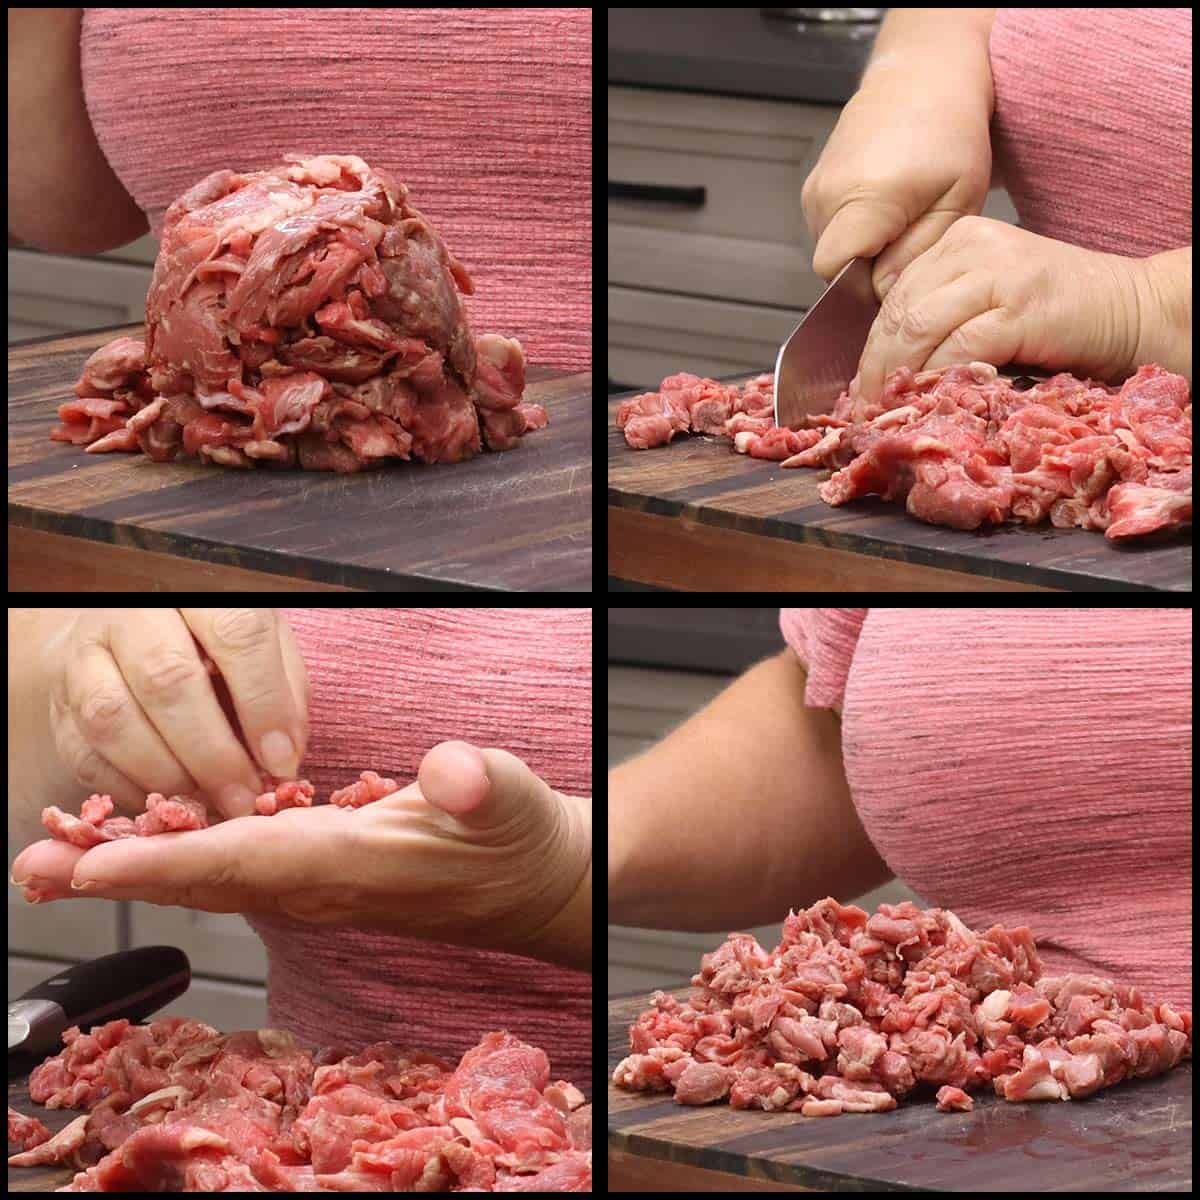 chopping meat for carne picada tacos.
